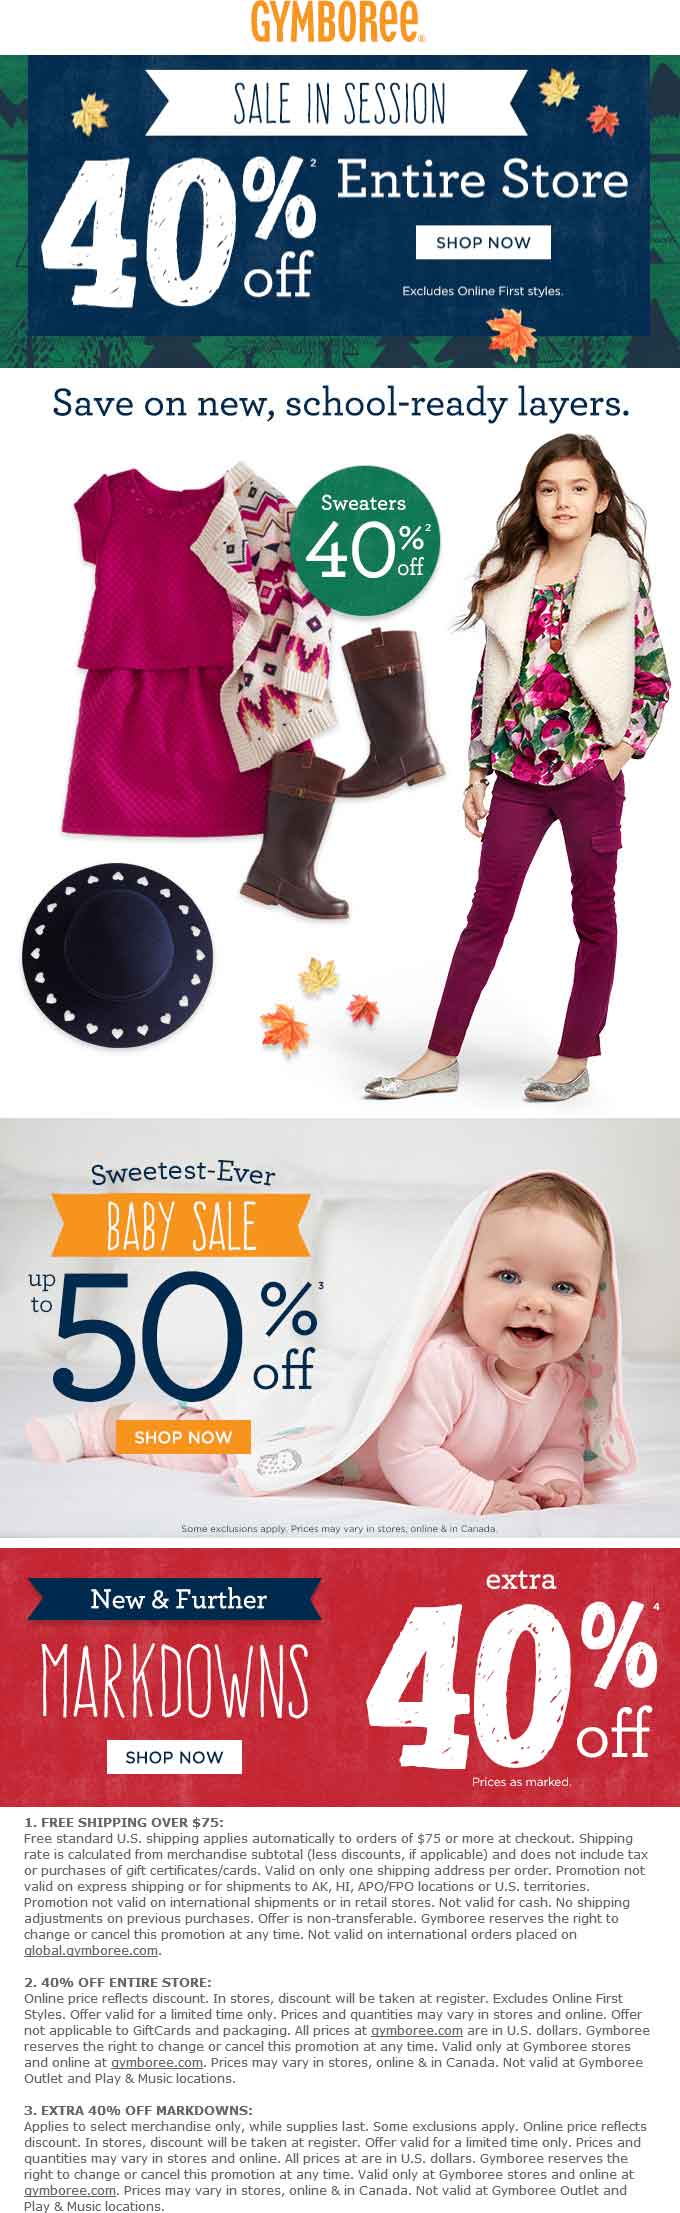 gymboree-october-2020-coupons-and-promo-codes